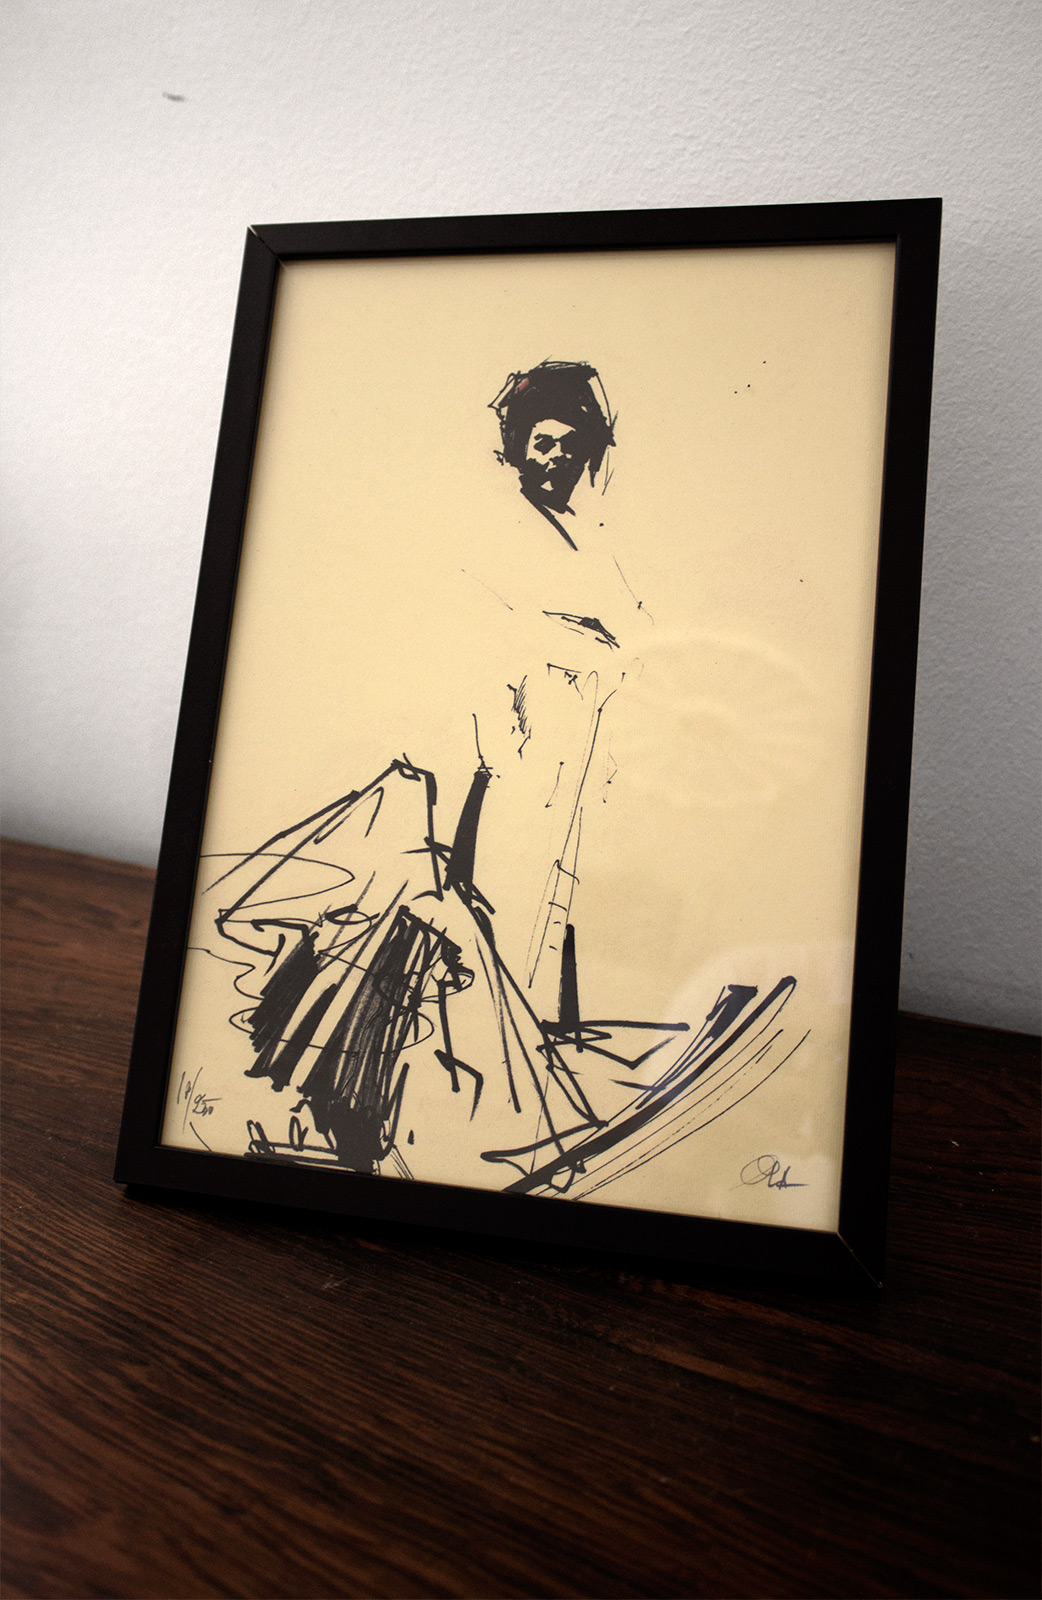 posters-prints, giclee-print, aesthetic, figurative, graphical, portraiture, bodies, movement, people, beige, black, red, ink, paper, abstract-forms, beautiful, contemporary-art, danish, decorative, design, female, interior, interior-design, modern, modern-art, nordic, posters, scandinavien, women, Buy original high quality art. Paintings, drawings, limited edition prints & posters by talented artists.